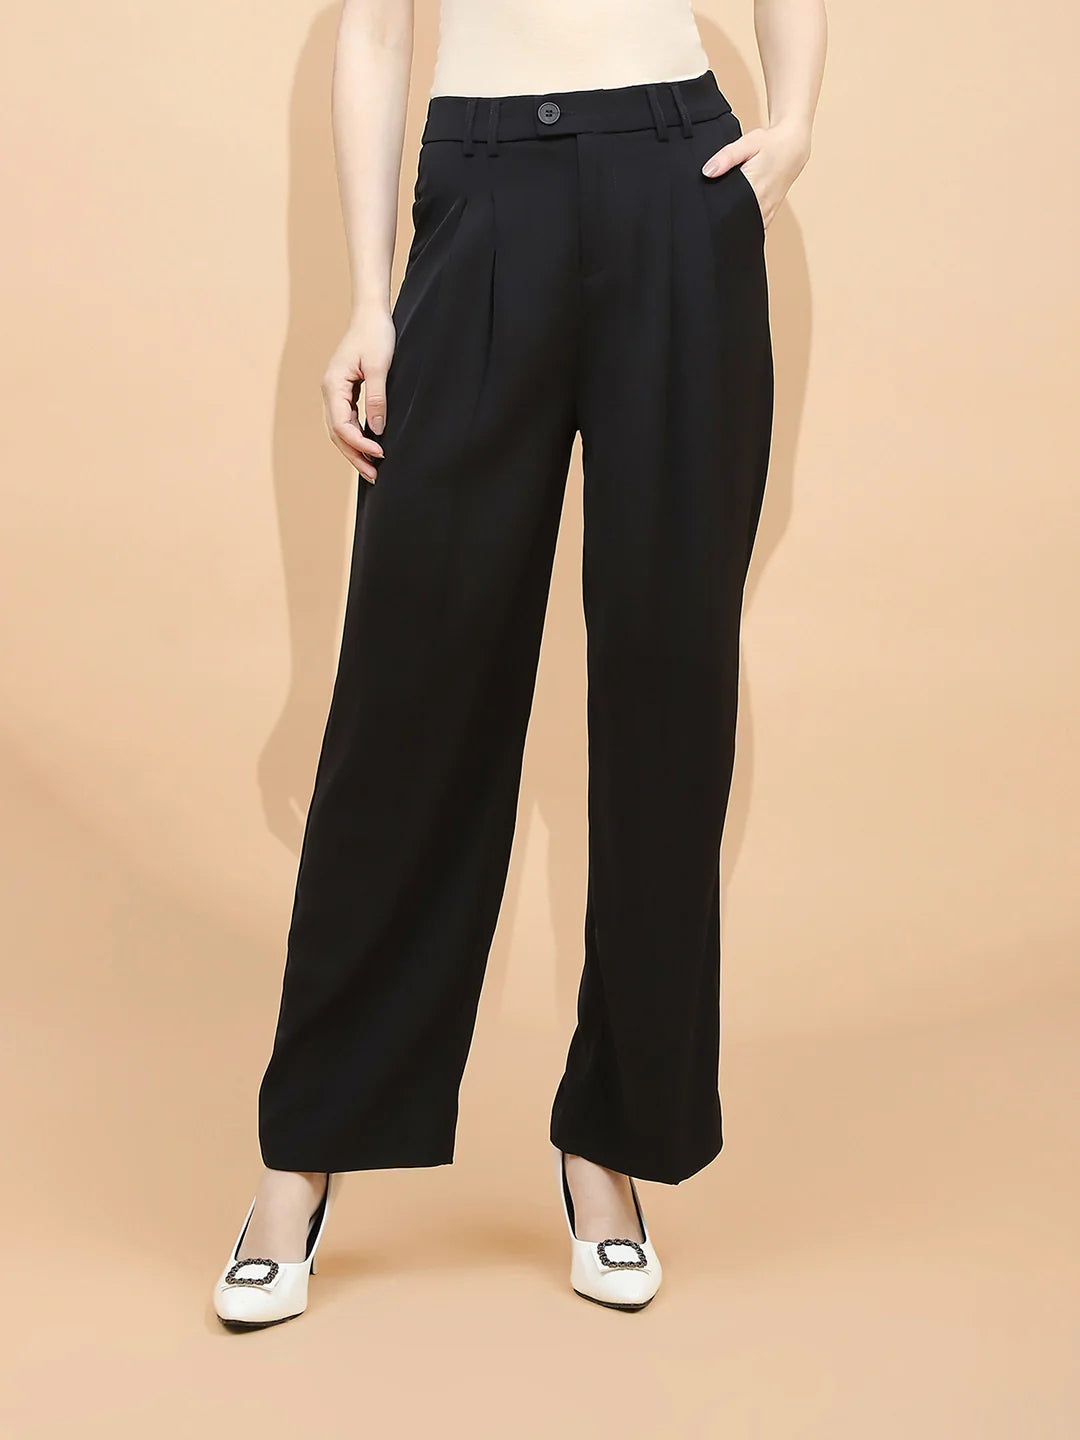 Black Polyester Blend Loose Fit Trouser For Women